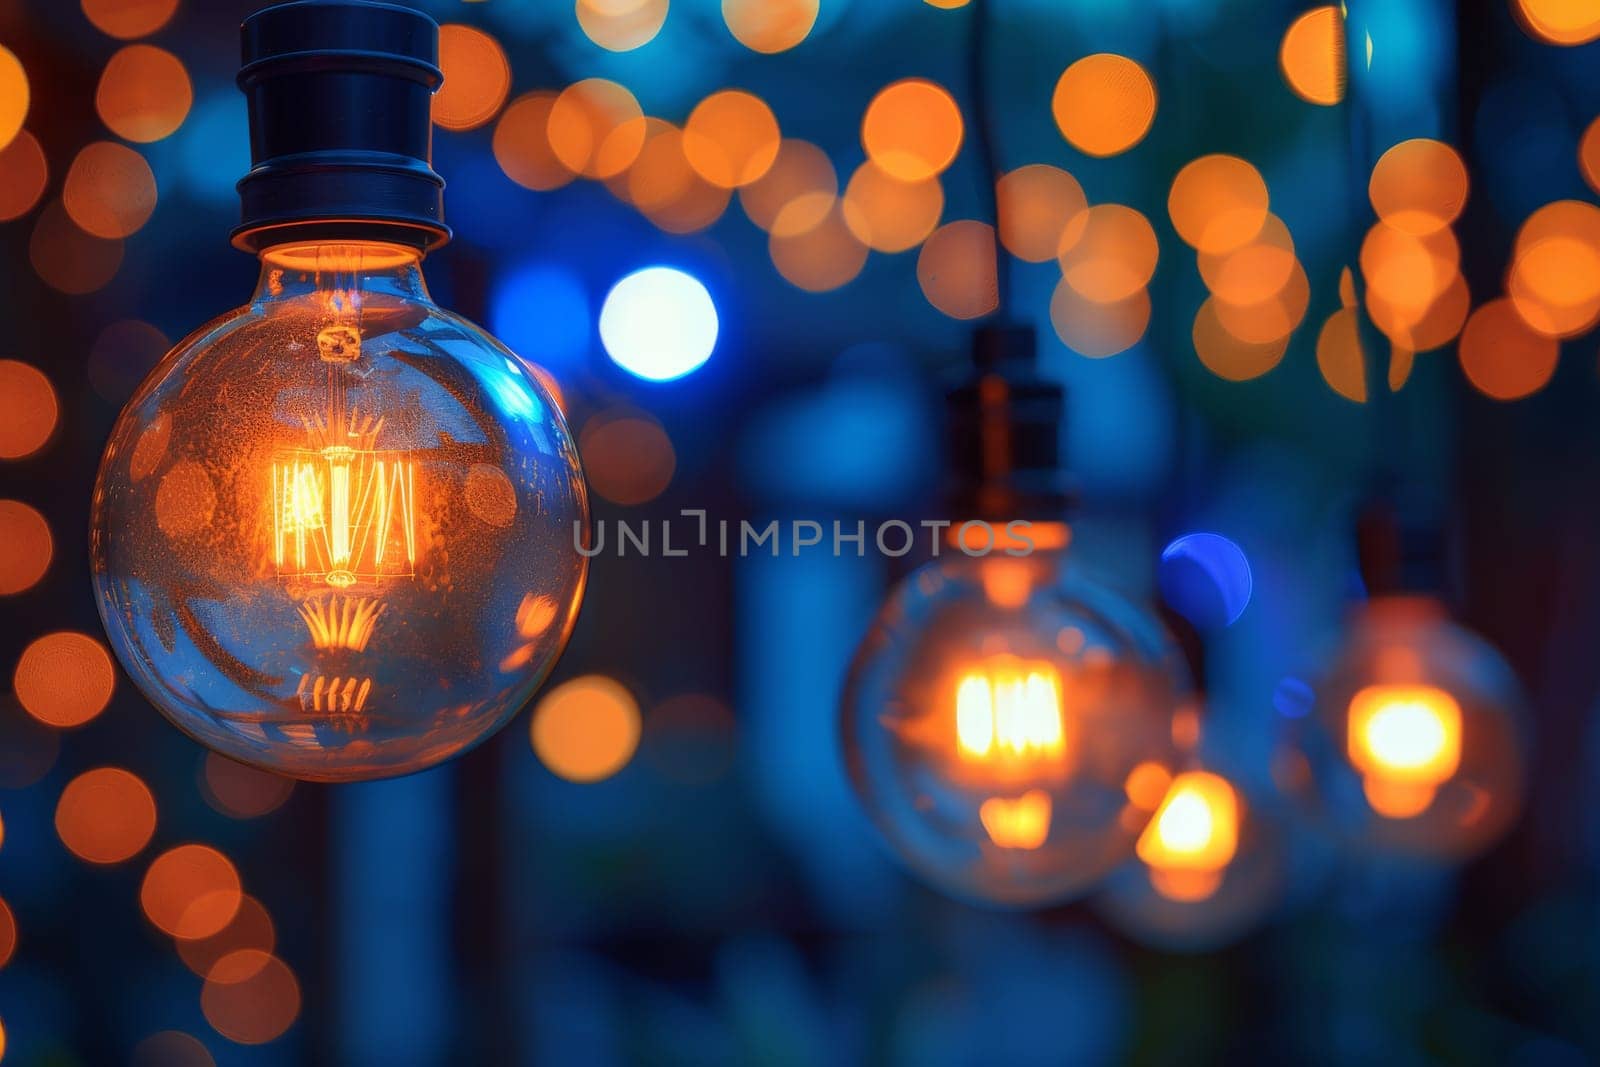 A group of light bulbs are hanging from the ceiling, with some of them being orange and others being blue. The scene has a warm and cozy atmosphere, with the lights casting a soft glow